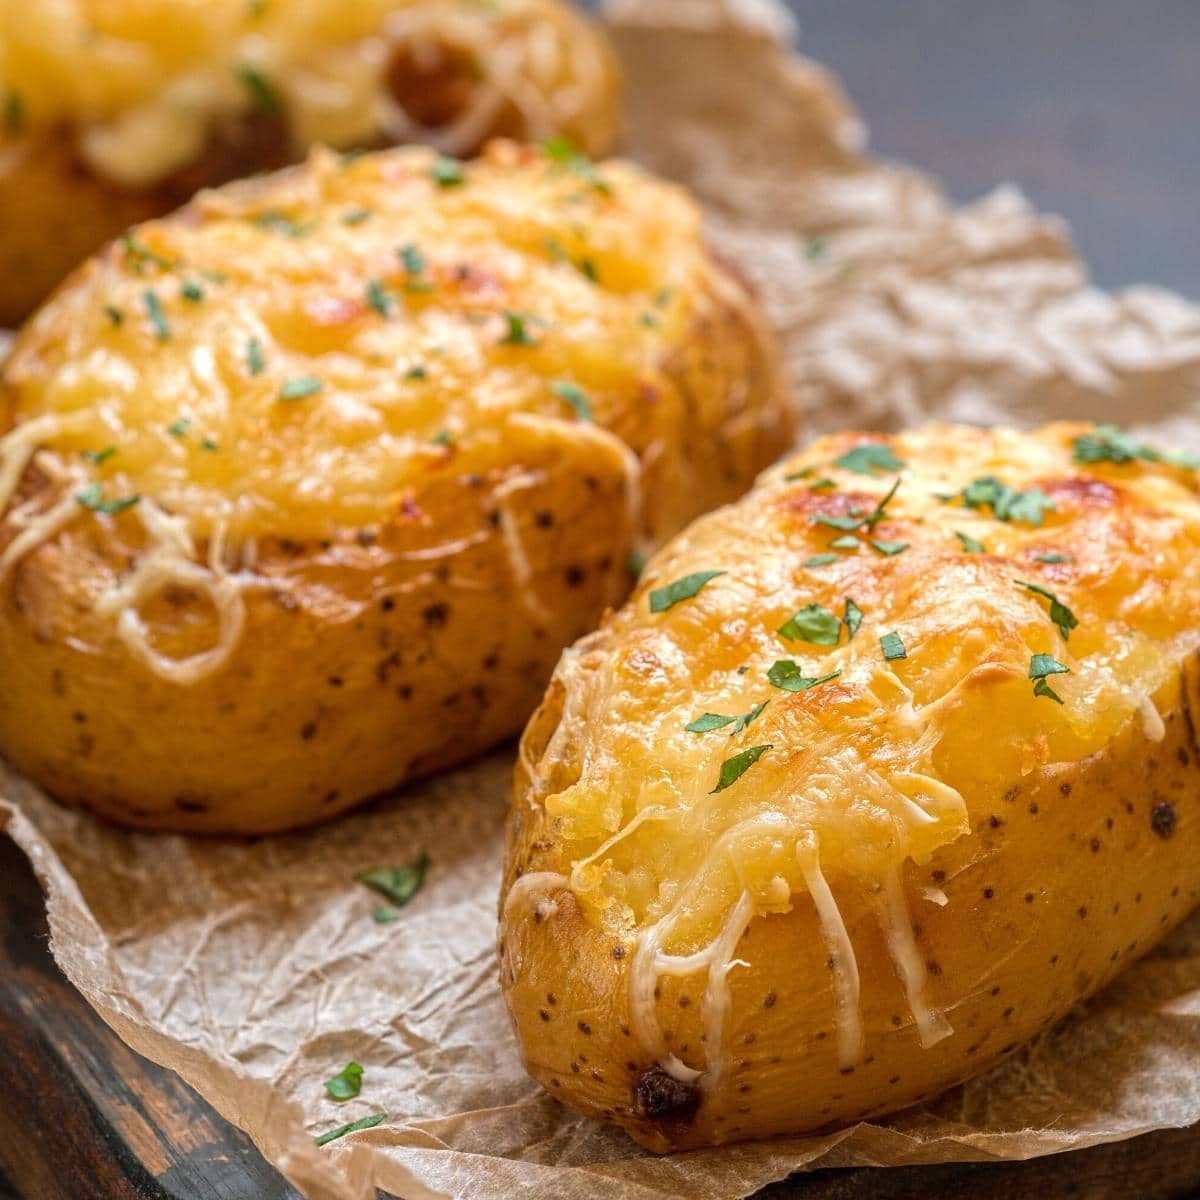 What Goes With Baked Potatoes? 25 Amazing Dishes